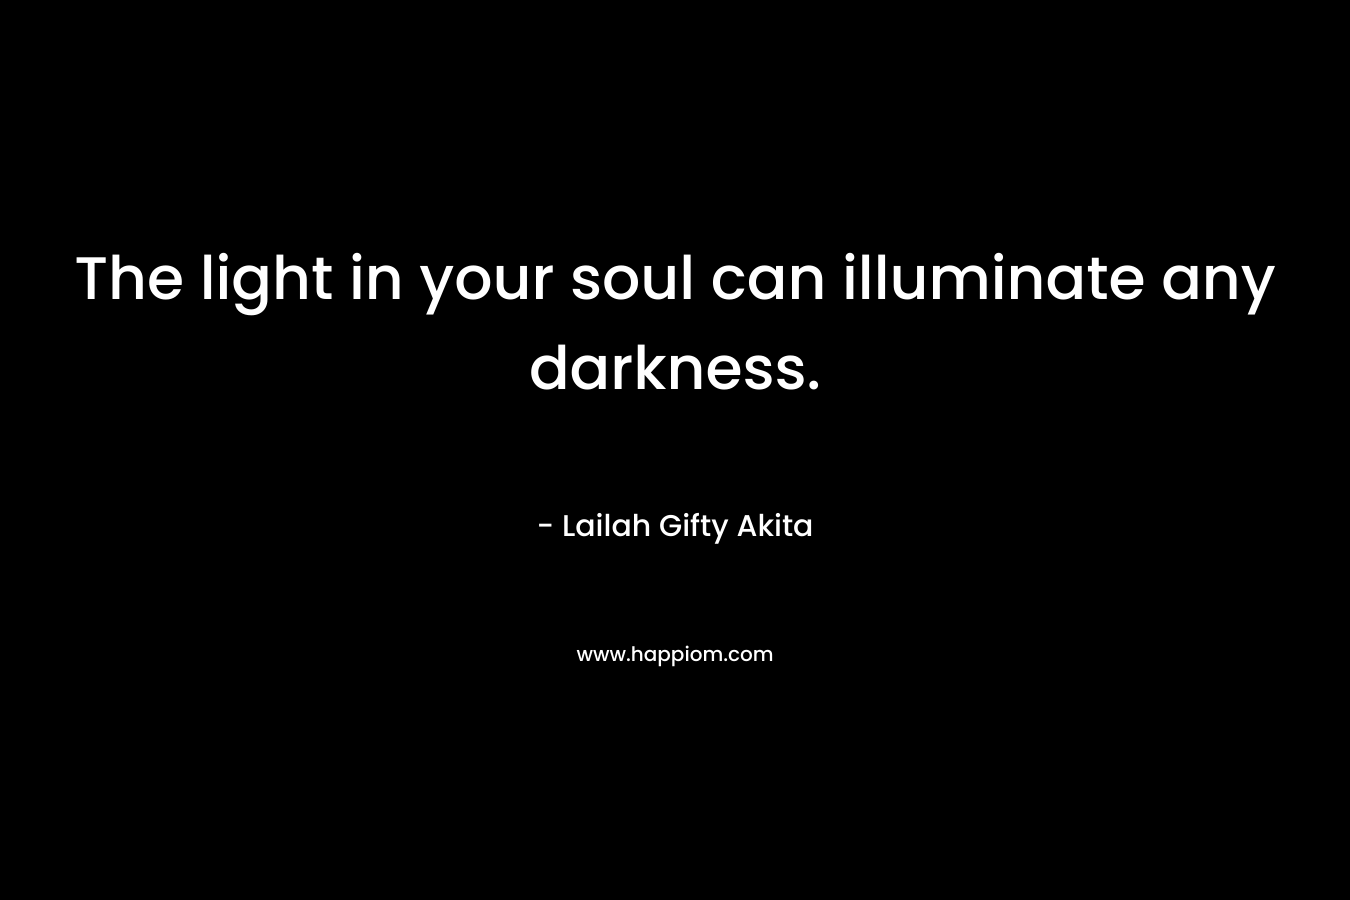 The light in your soul can illuminate any darkness.